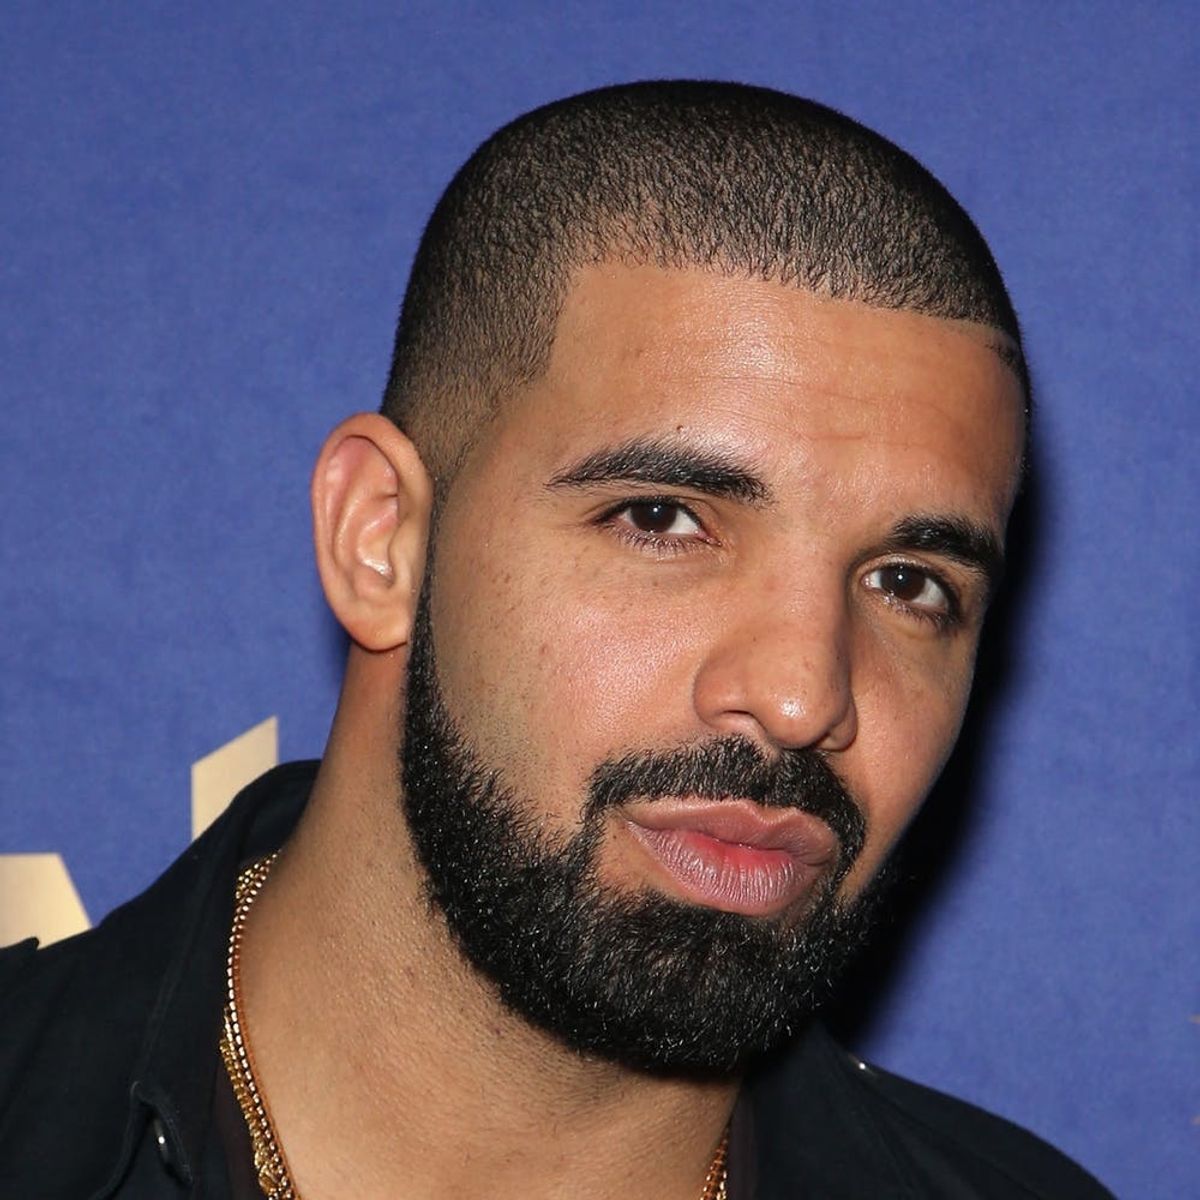 Fans Are Accusing Drake of Asking a Woman to Remove Her Hijab at a Concert